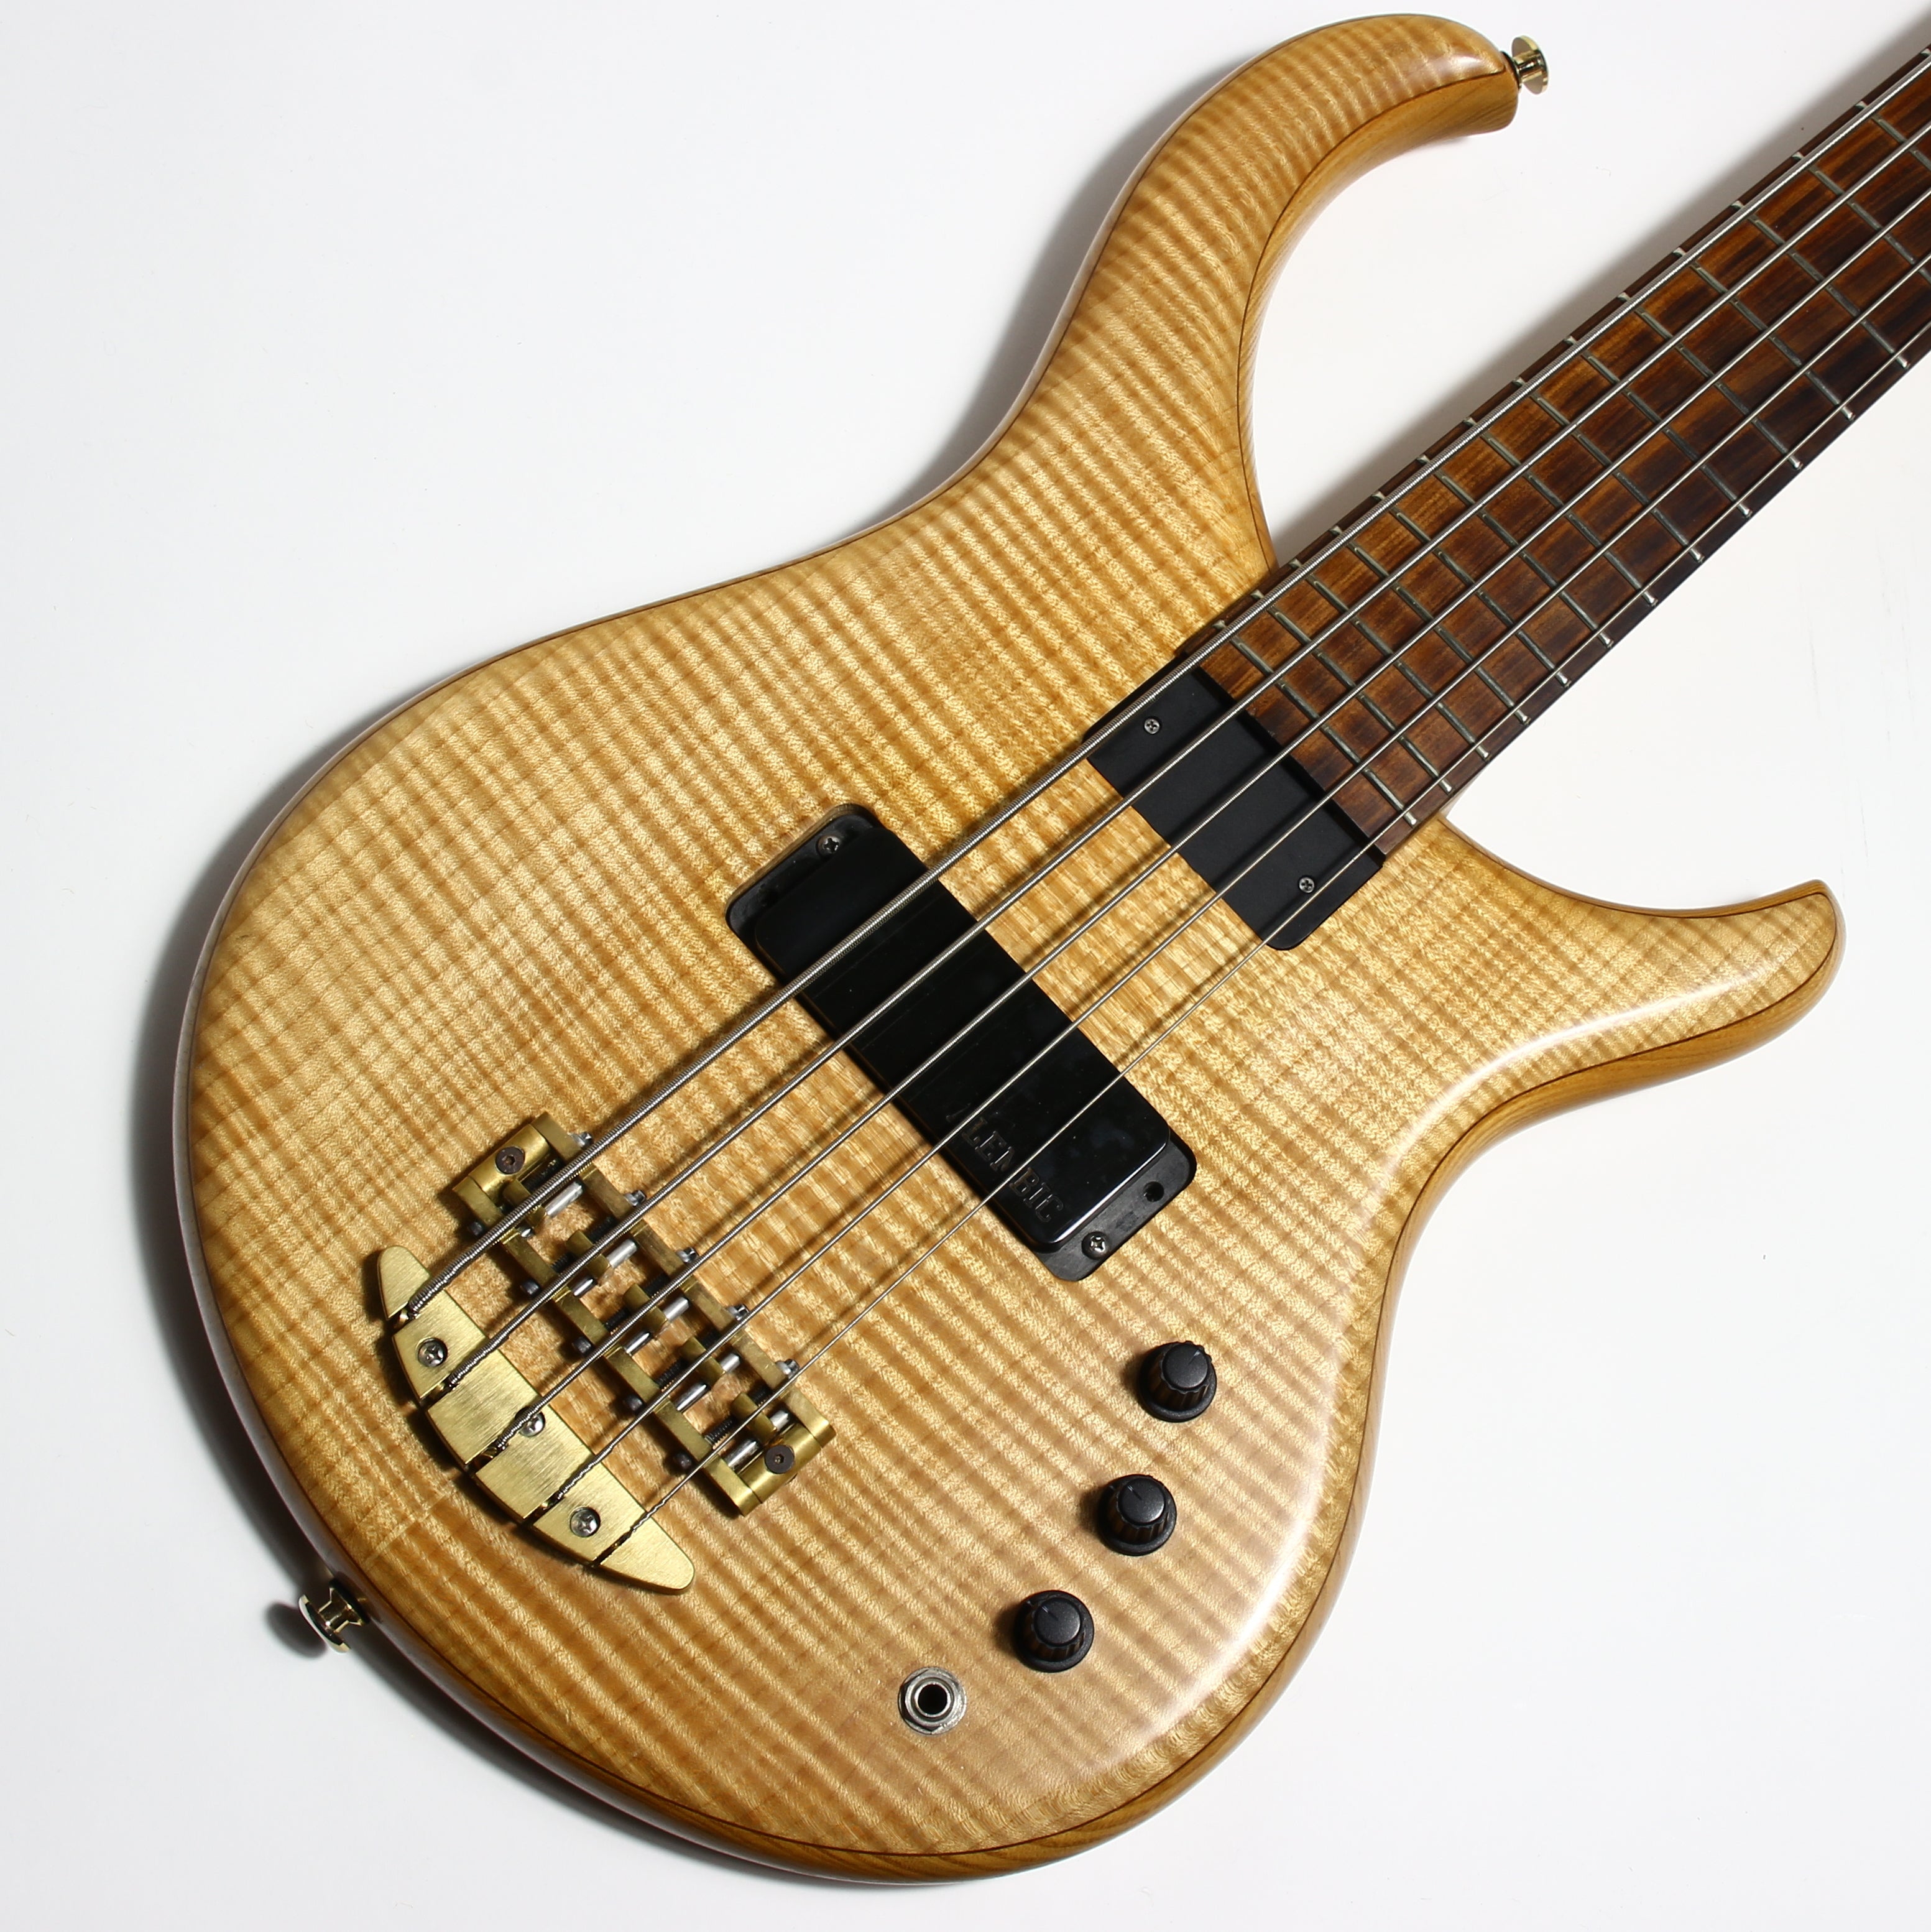 *SOLD*  1999 Alembic Excel 5-String Bass - Flame Maple Top, Ash Body, Pau Ferro Board, High Quality USA!